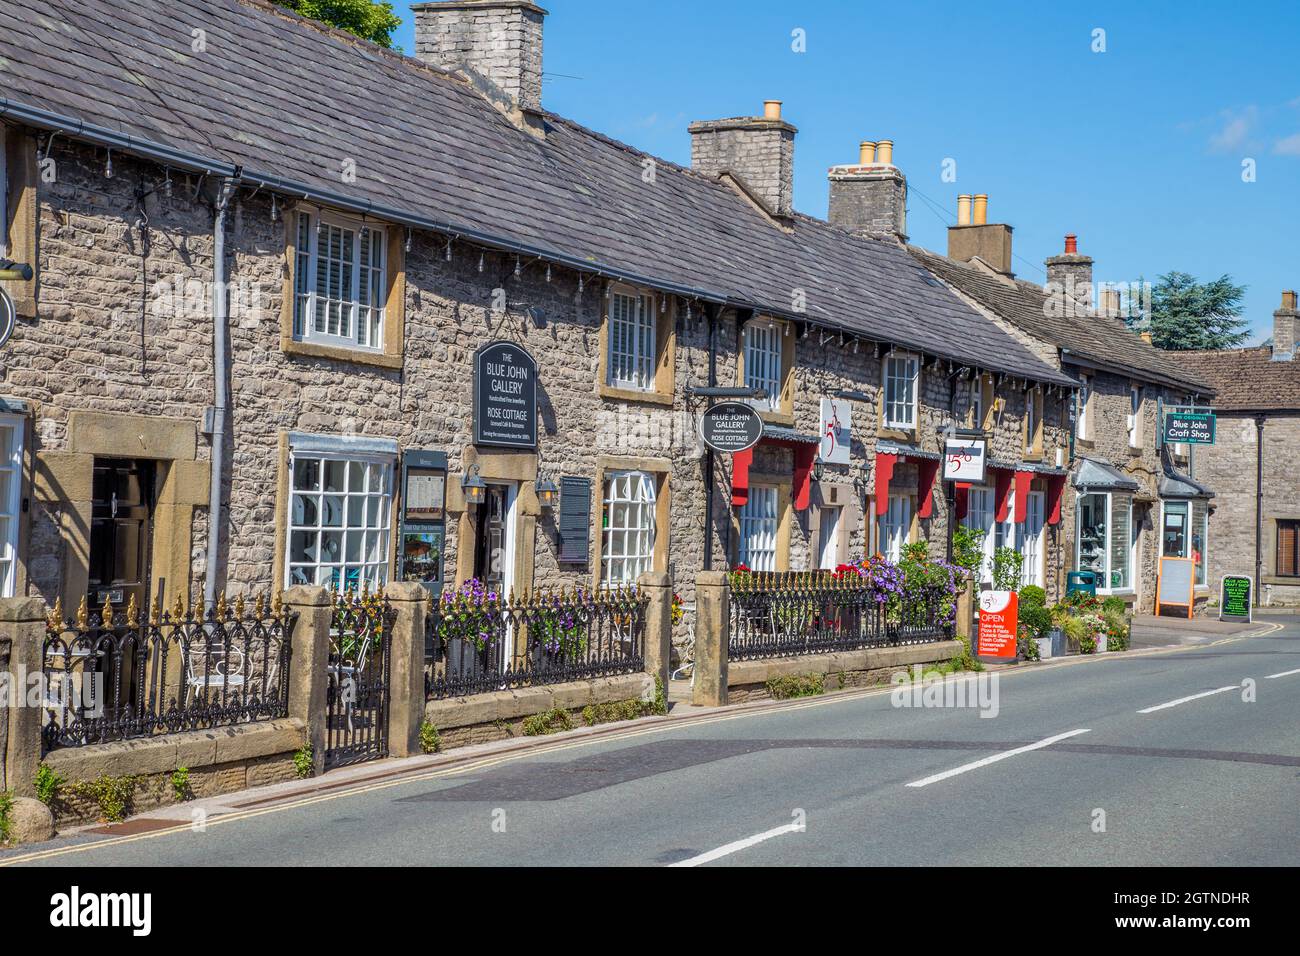 Shops selling the local Blue John mineral in Castleton village in the High Peak of the Hope Valley, Peak District National Park Stock Photo